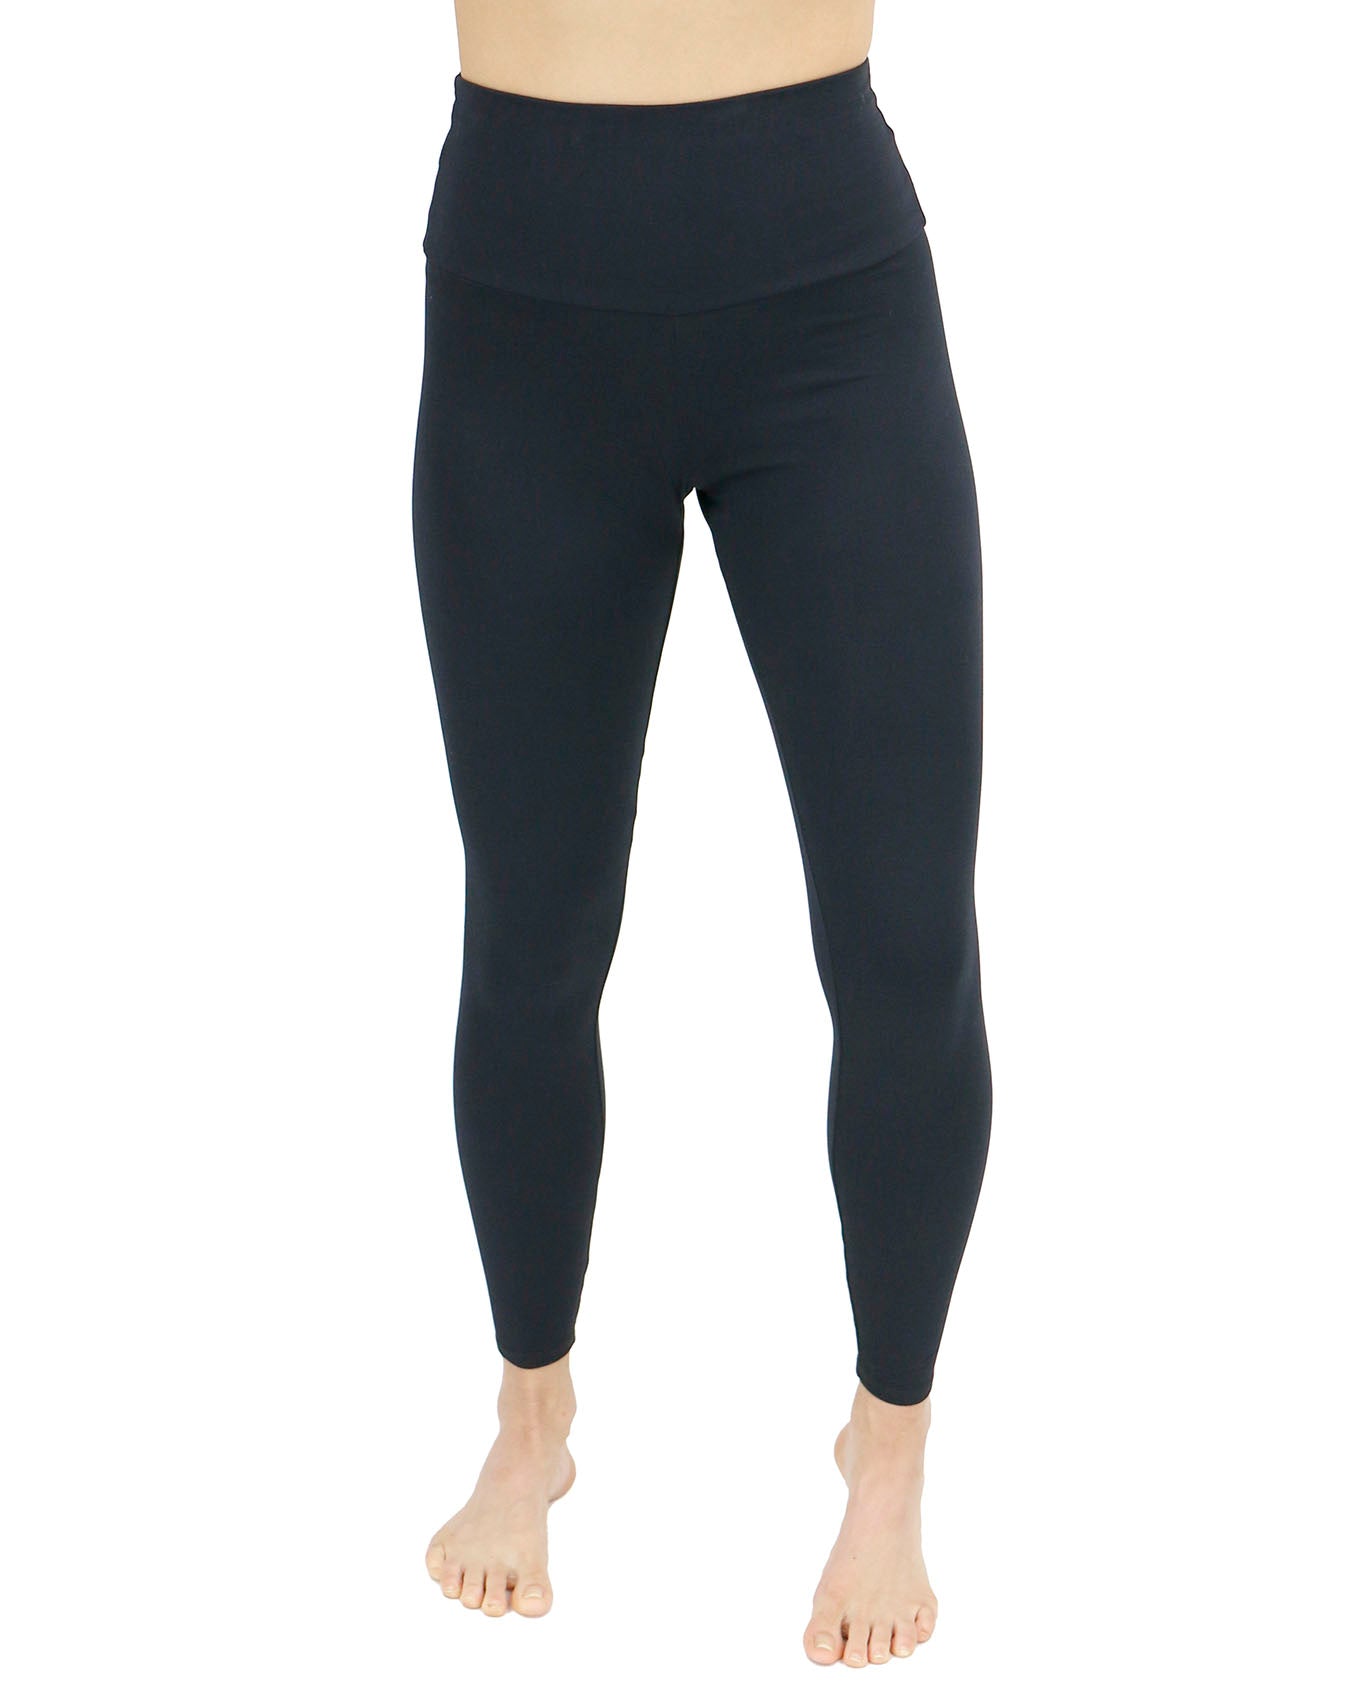 Women Autumn Winter Thick Warm Legging Brushed Lining Stretch